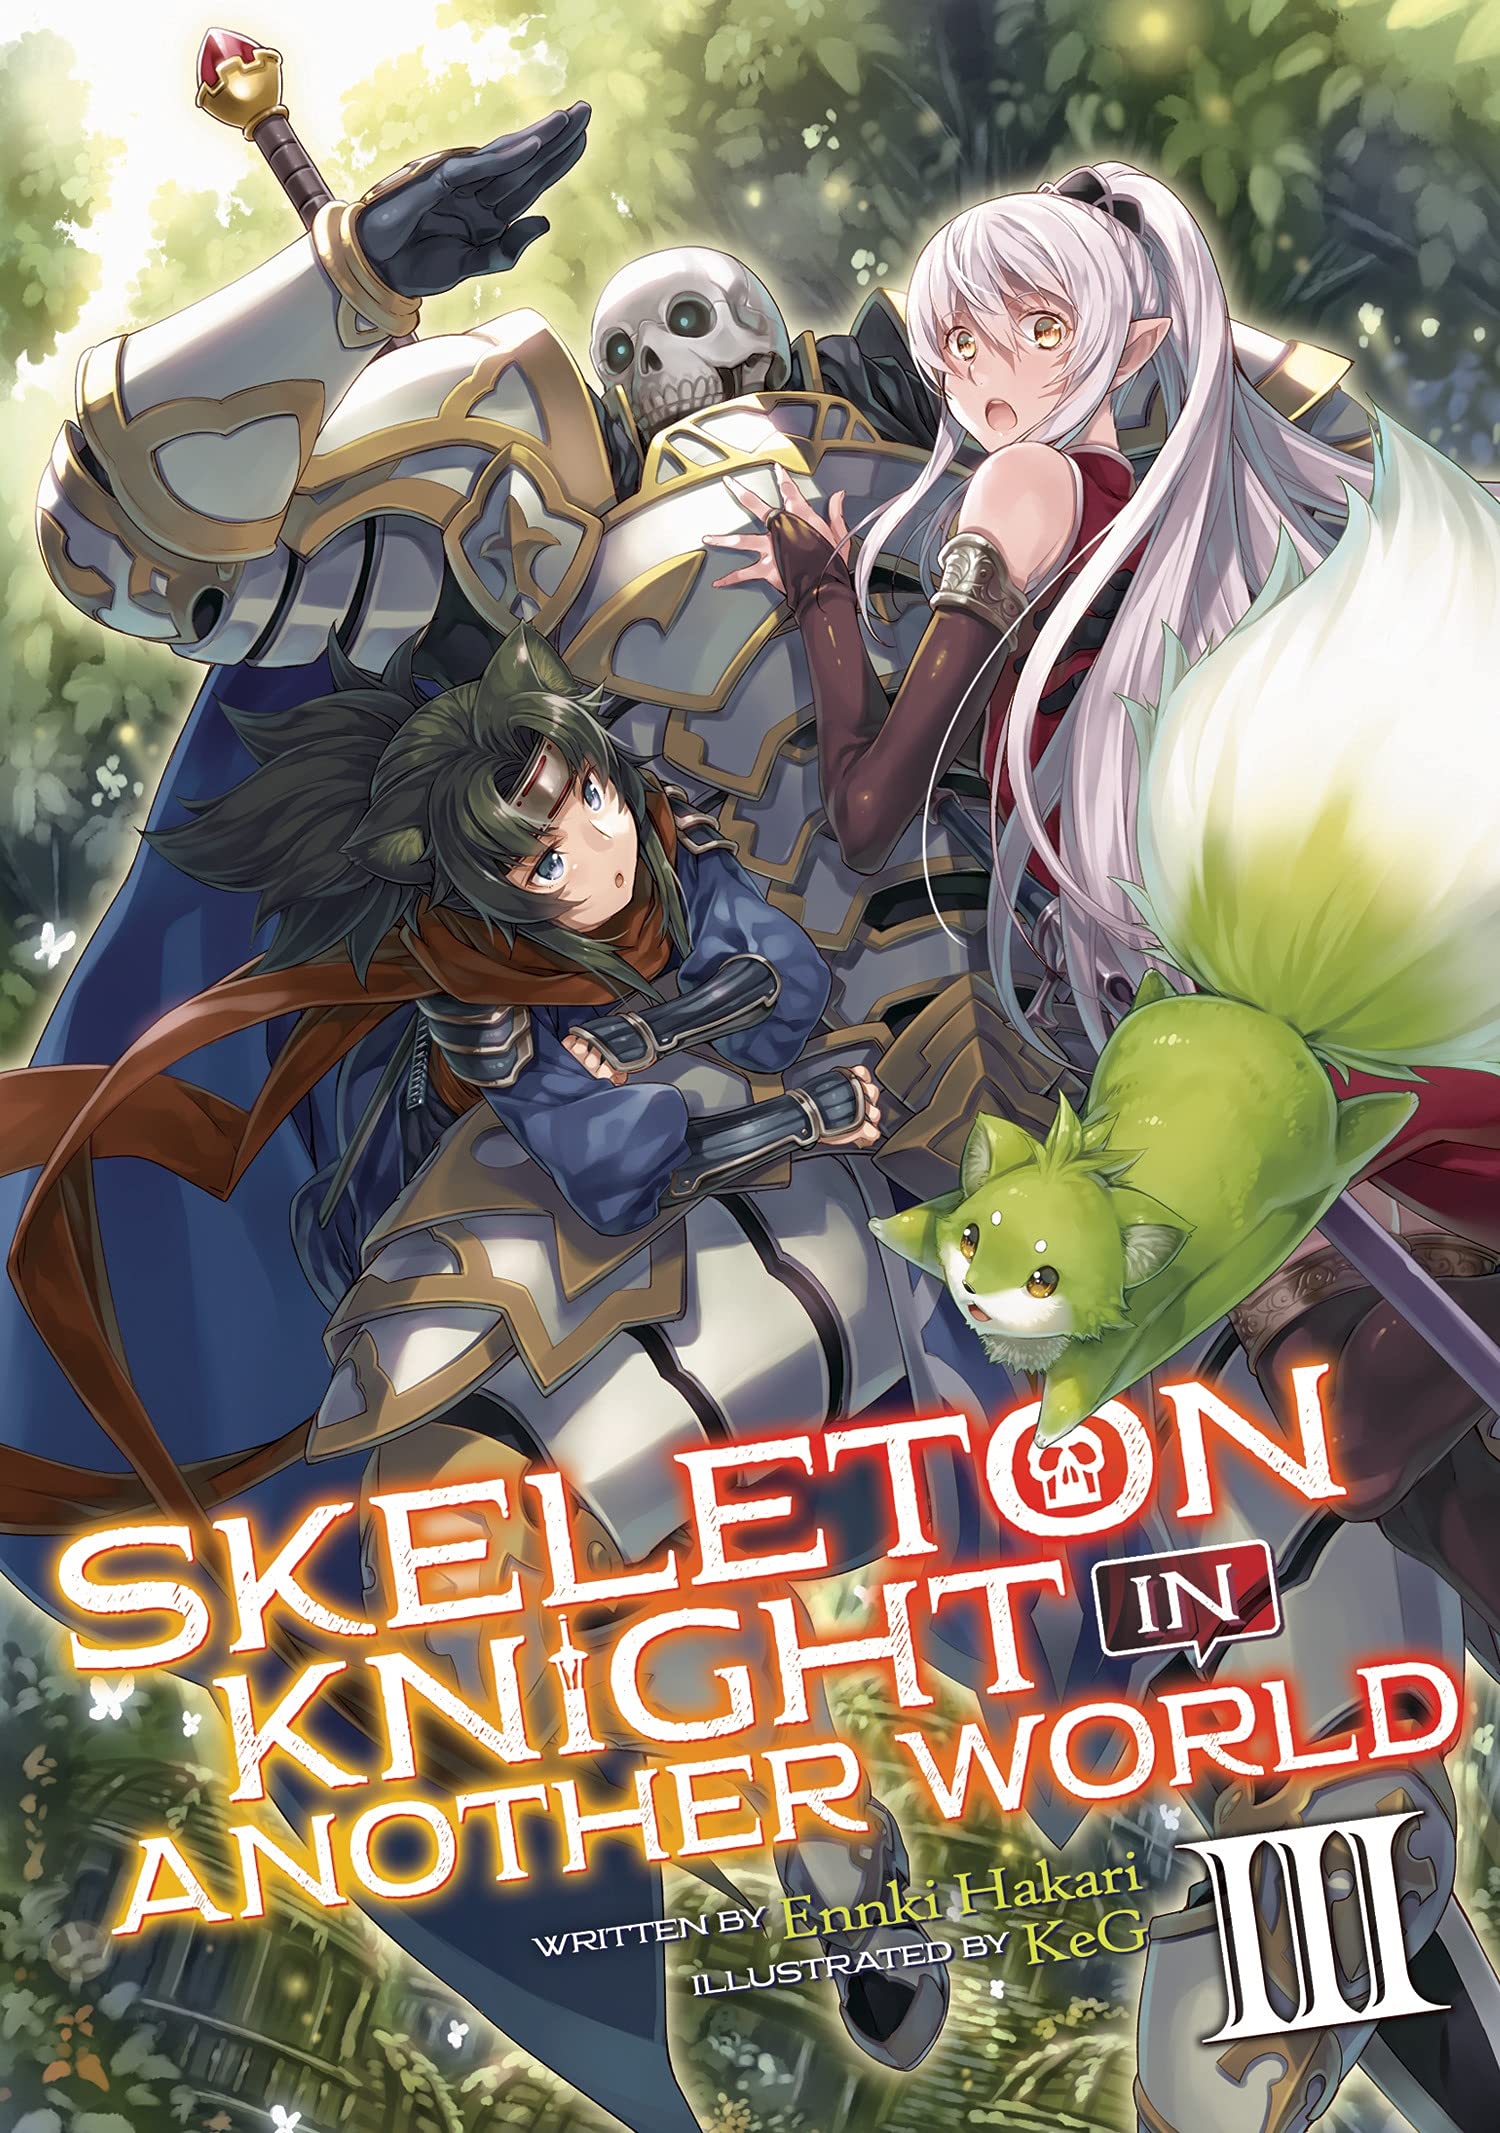 Anime Skeleton Knight in Another World 4k Ultra HD Wallpaper by ミコシバ